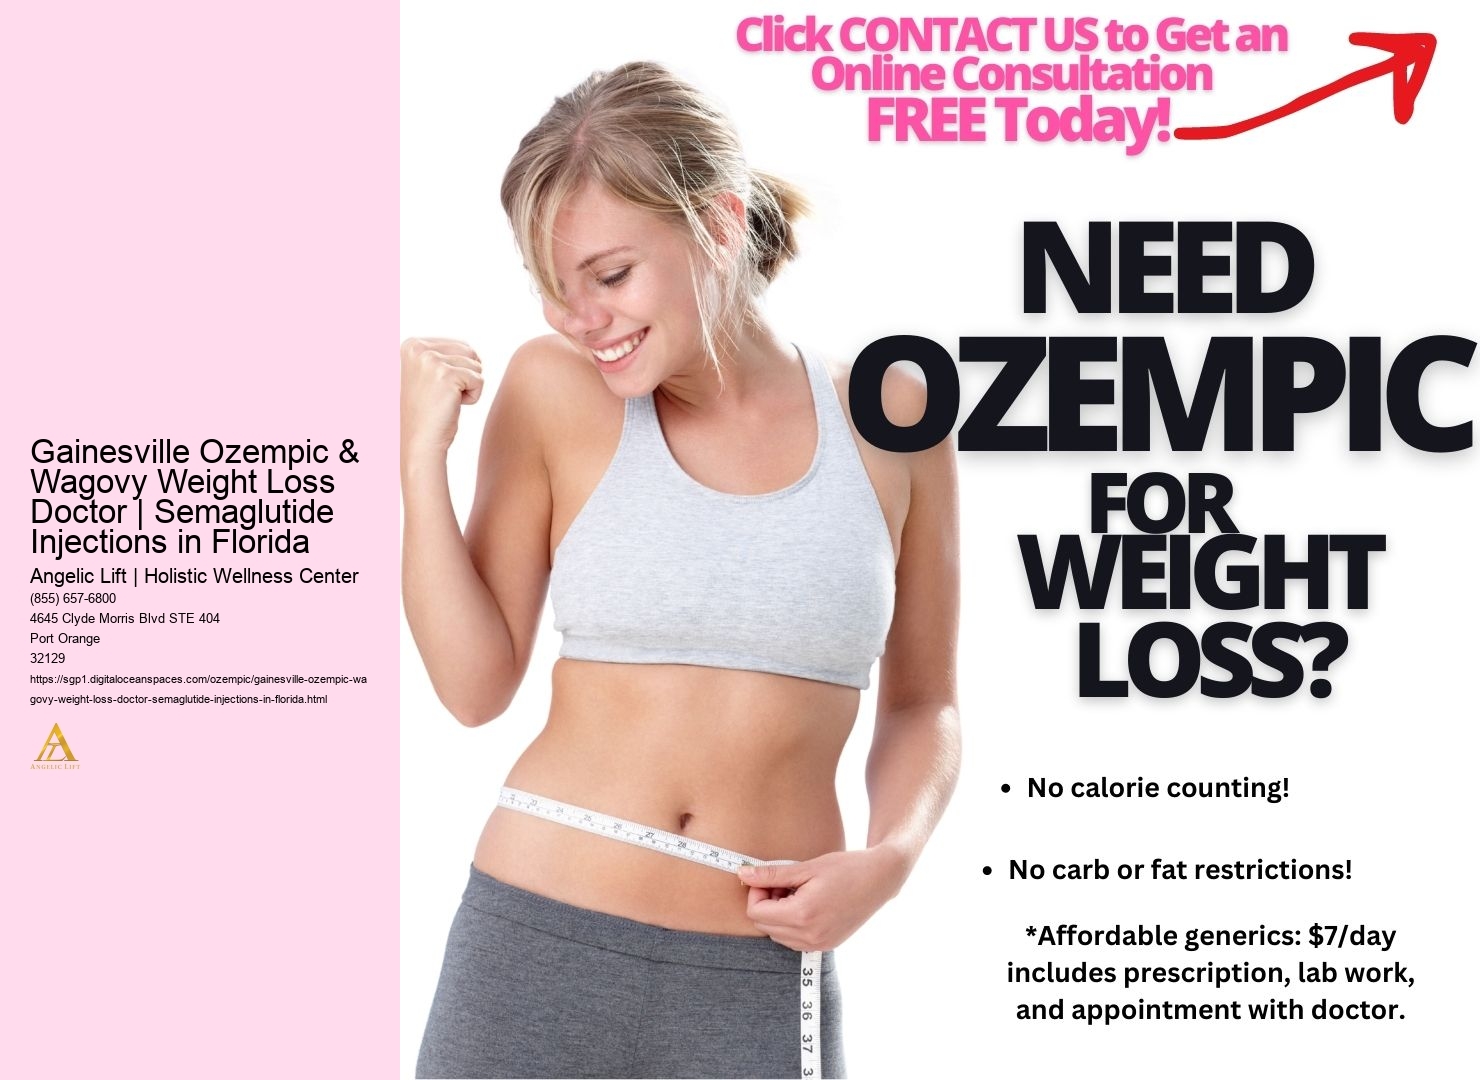 Gainesville Ozempic & Wagovy Weight Loss Doctor | Semaglutide Injections in Florida